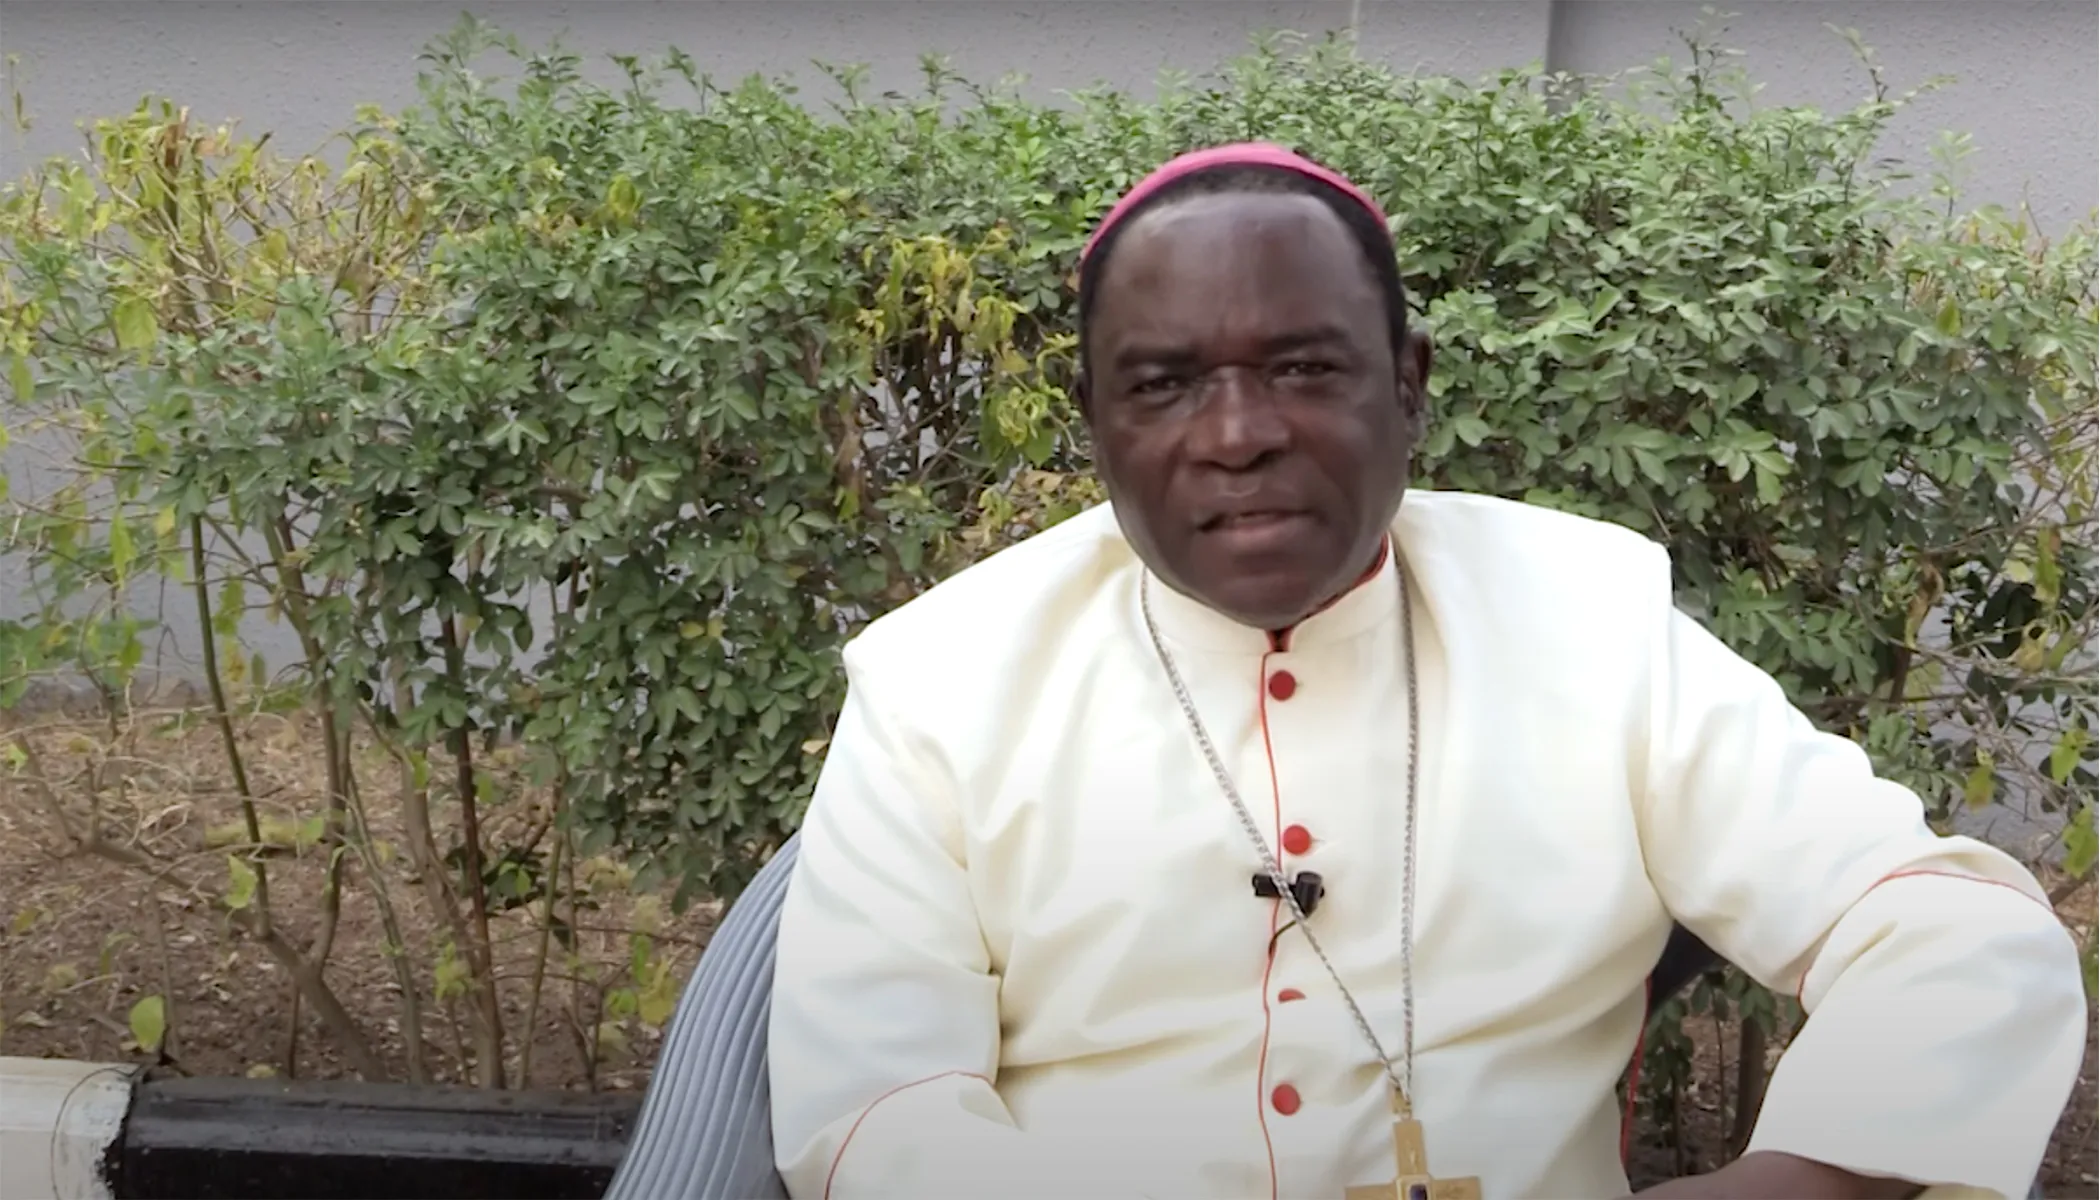 Bishop Matthew Hassan Kukah of the Diocese of Sokoto, Nigeria?w=200&h=150